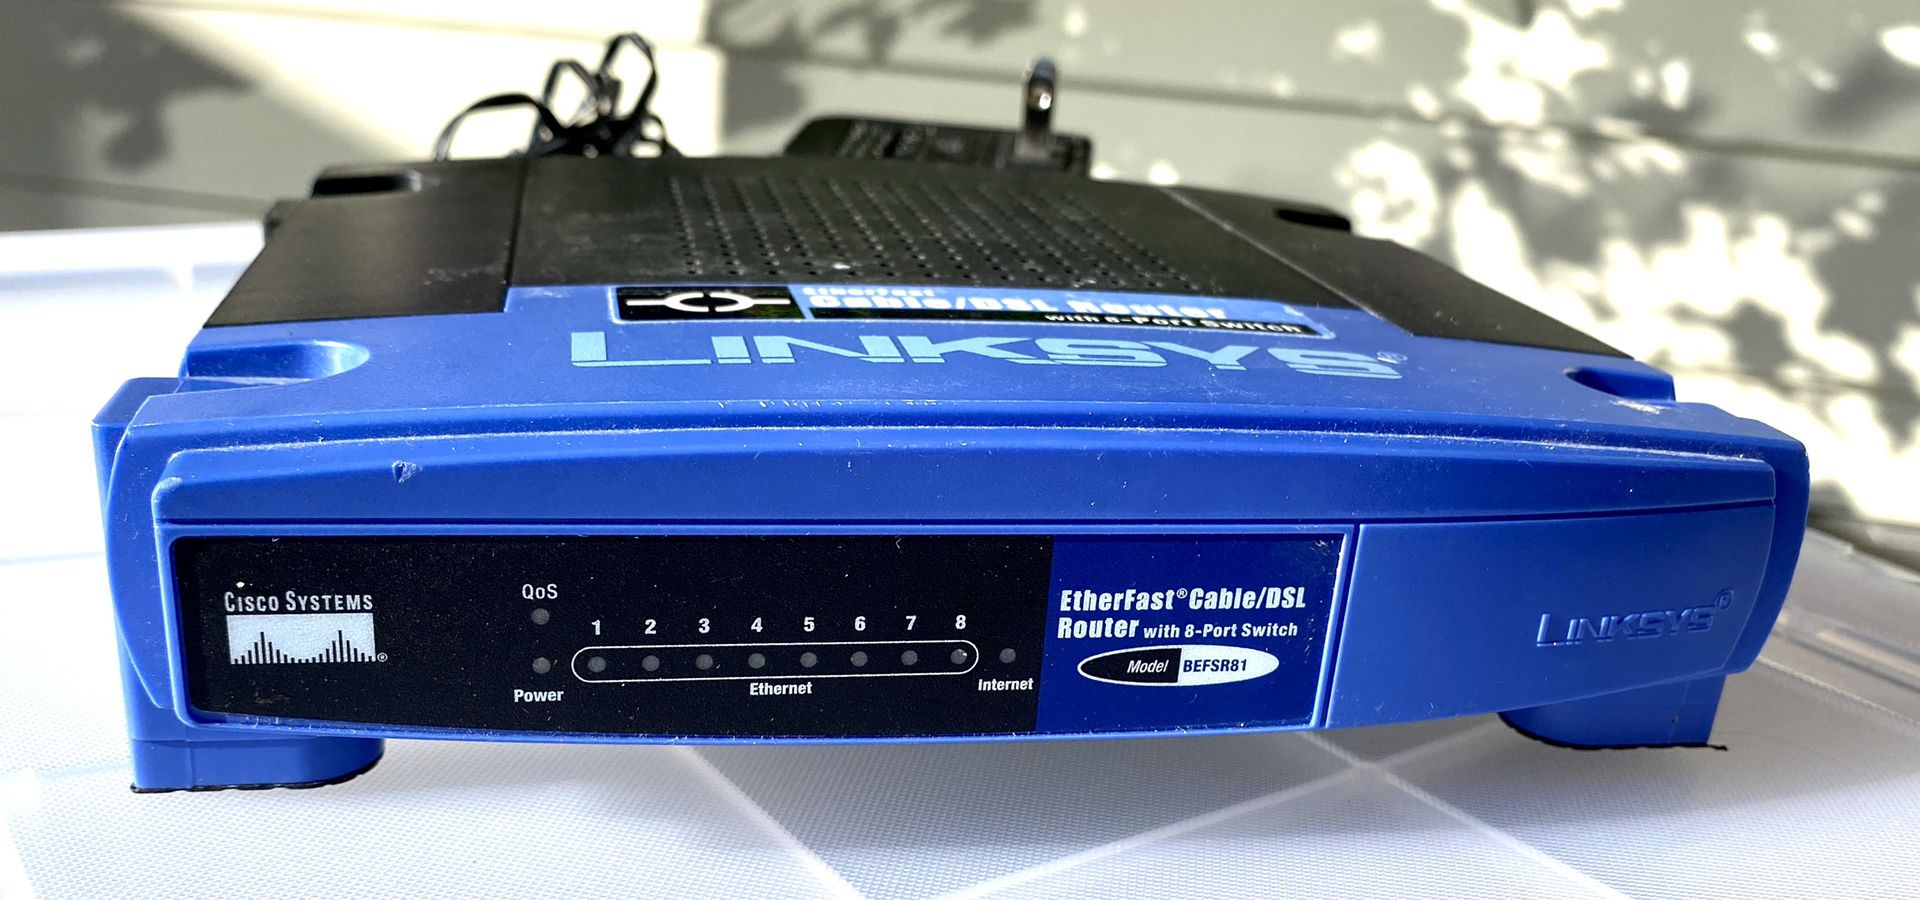 LinkSys Cable/DSL Router with 8-Port 10/100 Switch Wired Router, Model #BEFSR81